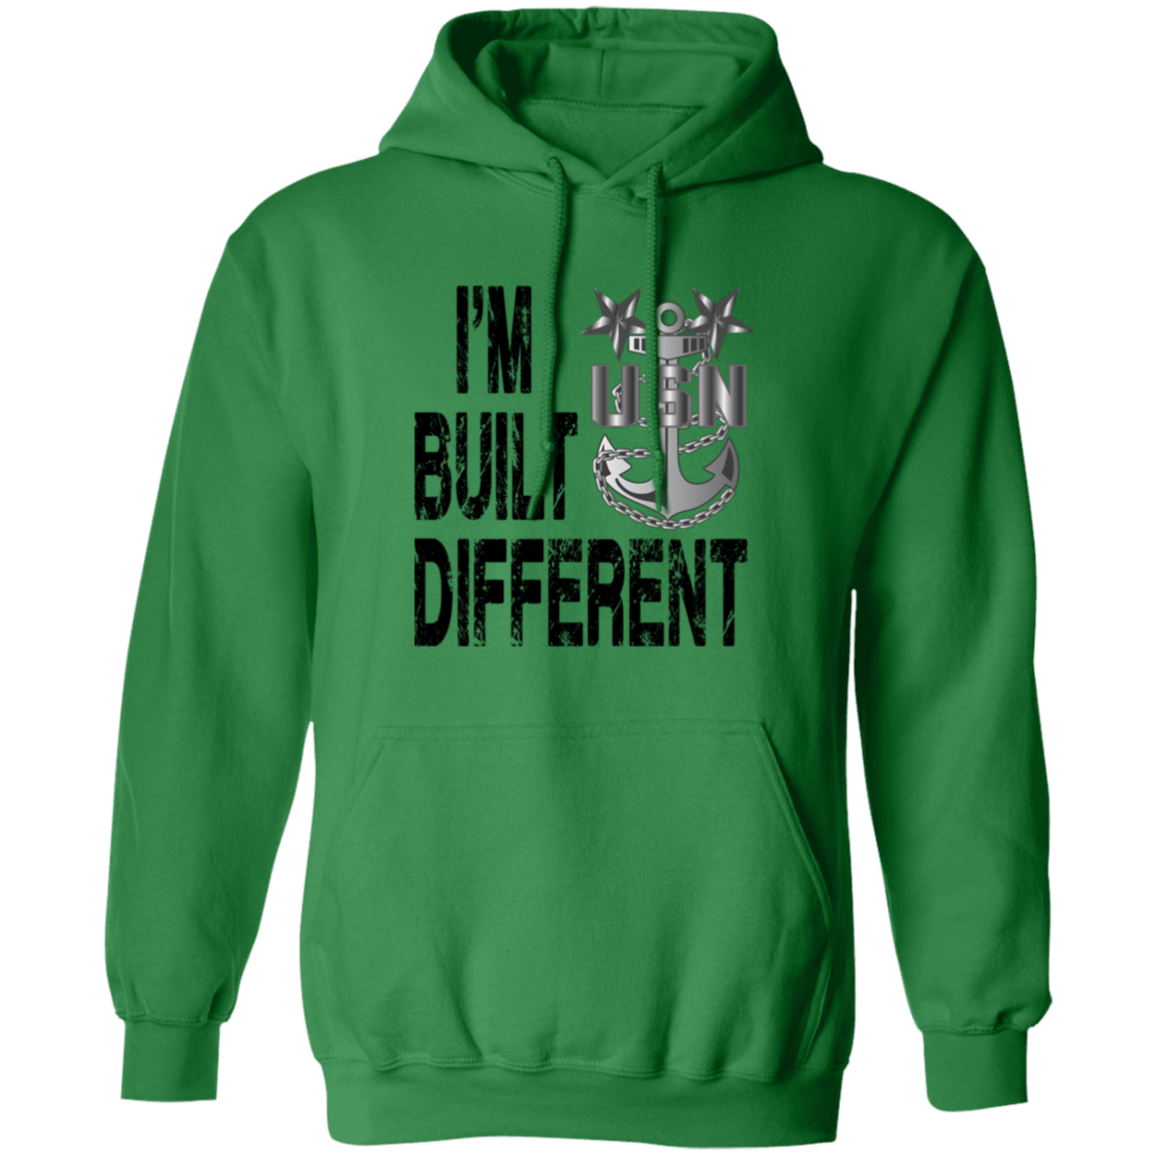 Built Different Master Chief Pullover Hoodie